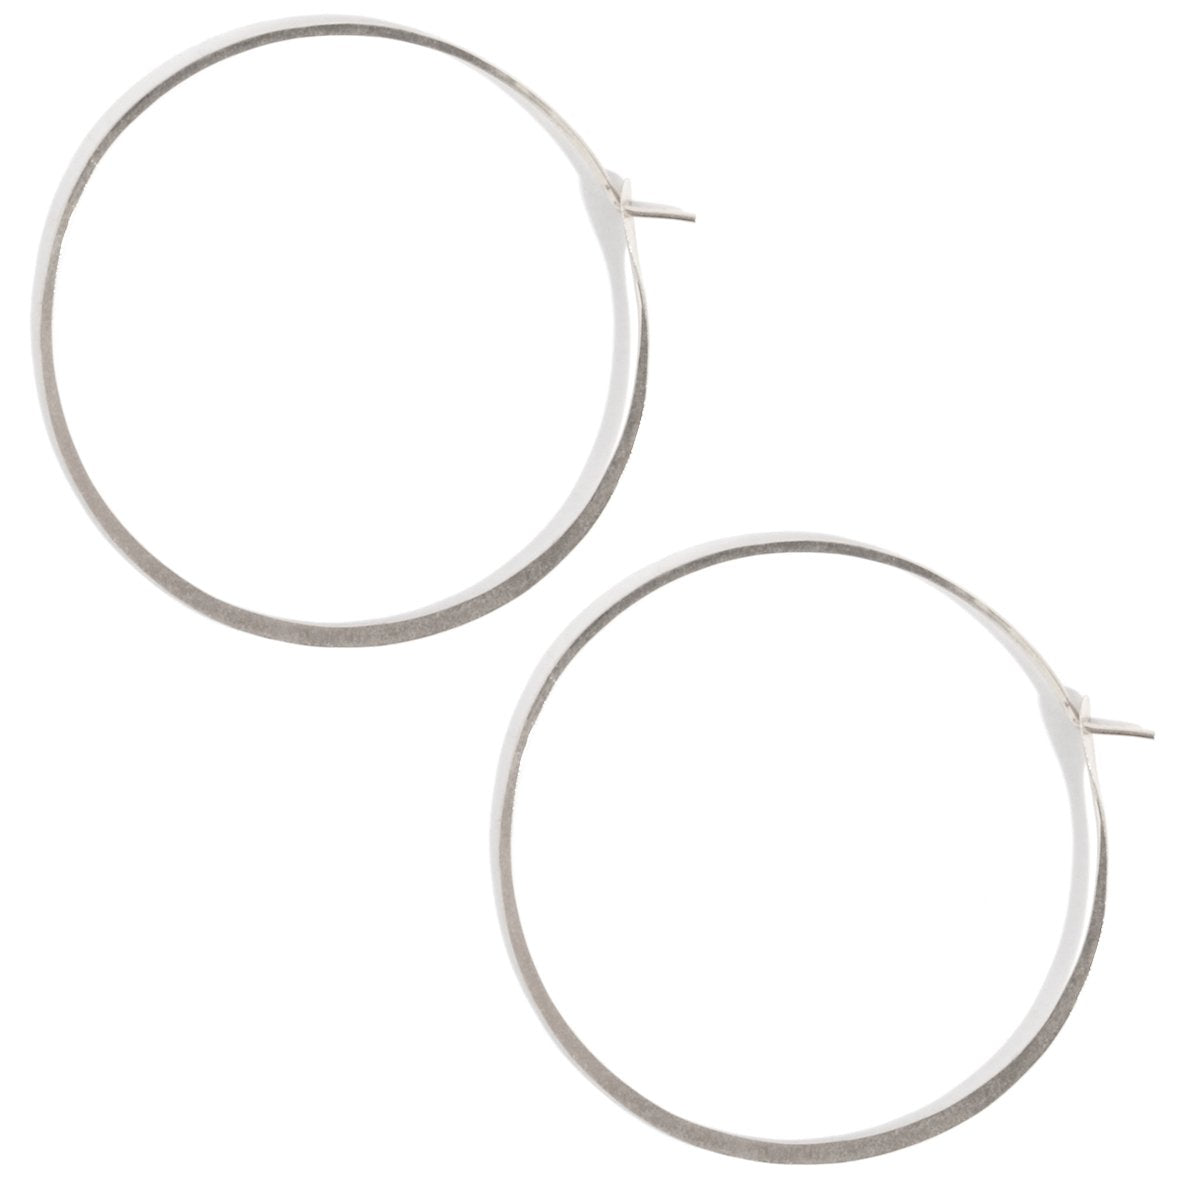 Buy 1.75 Large Plain Polished Hoop Earrings Real 925 Sterling Silver 3mm X  45mm Online in India - Etsy